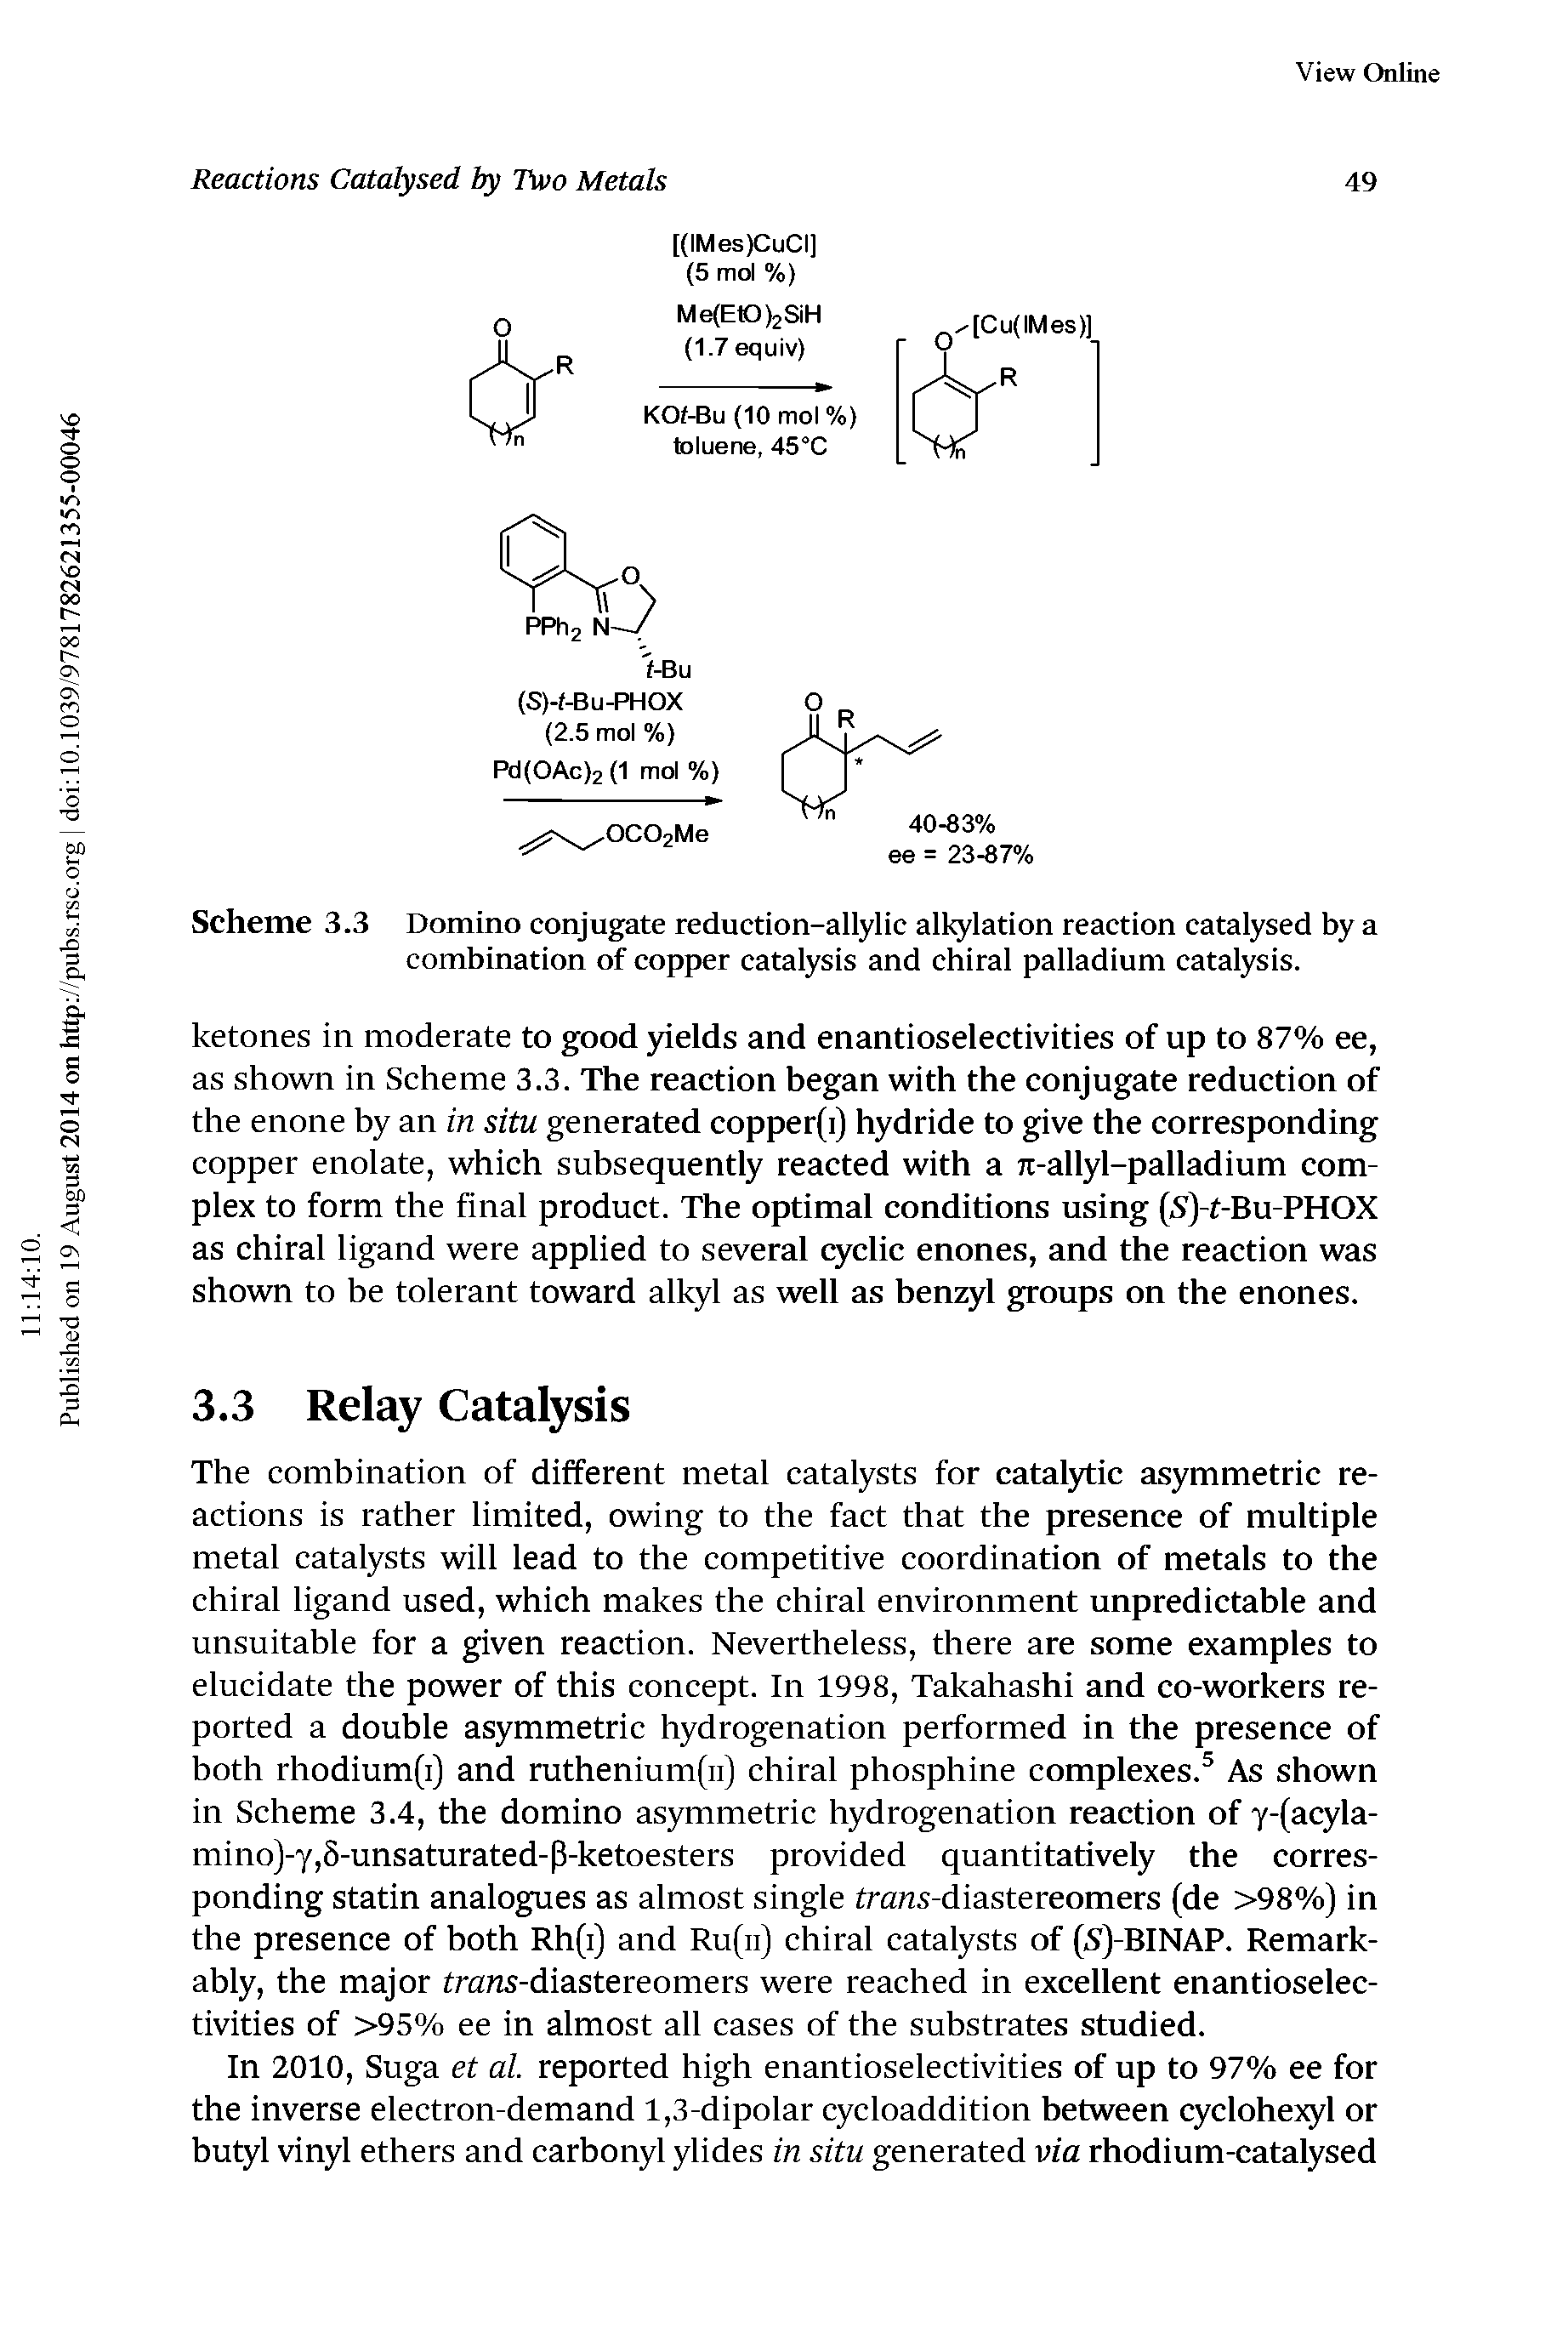 Scheme 3.3 Domino conjugate reduction-allylic alkylation reaction catalysed by a combination of copper catalysis and chiral palladium catalysis.